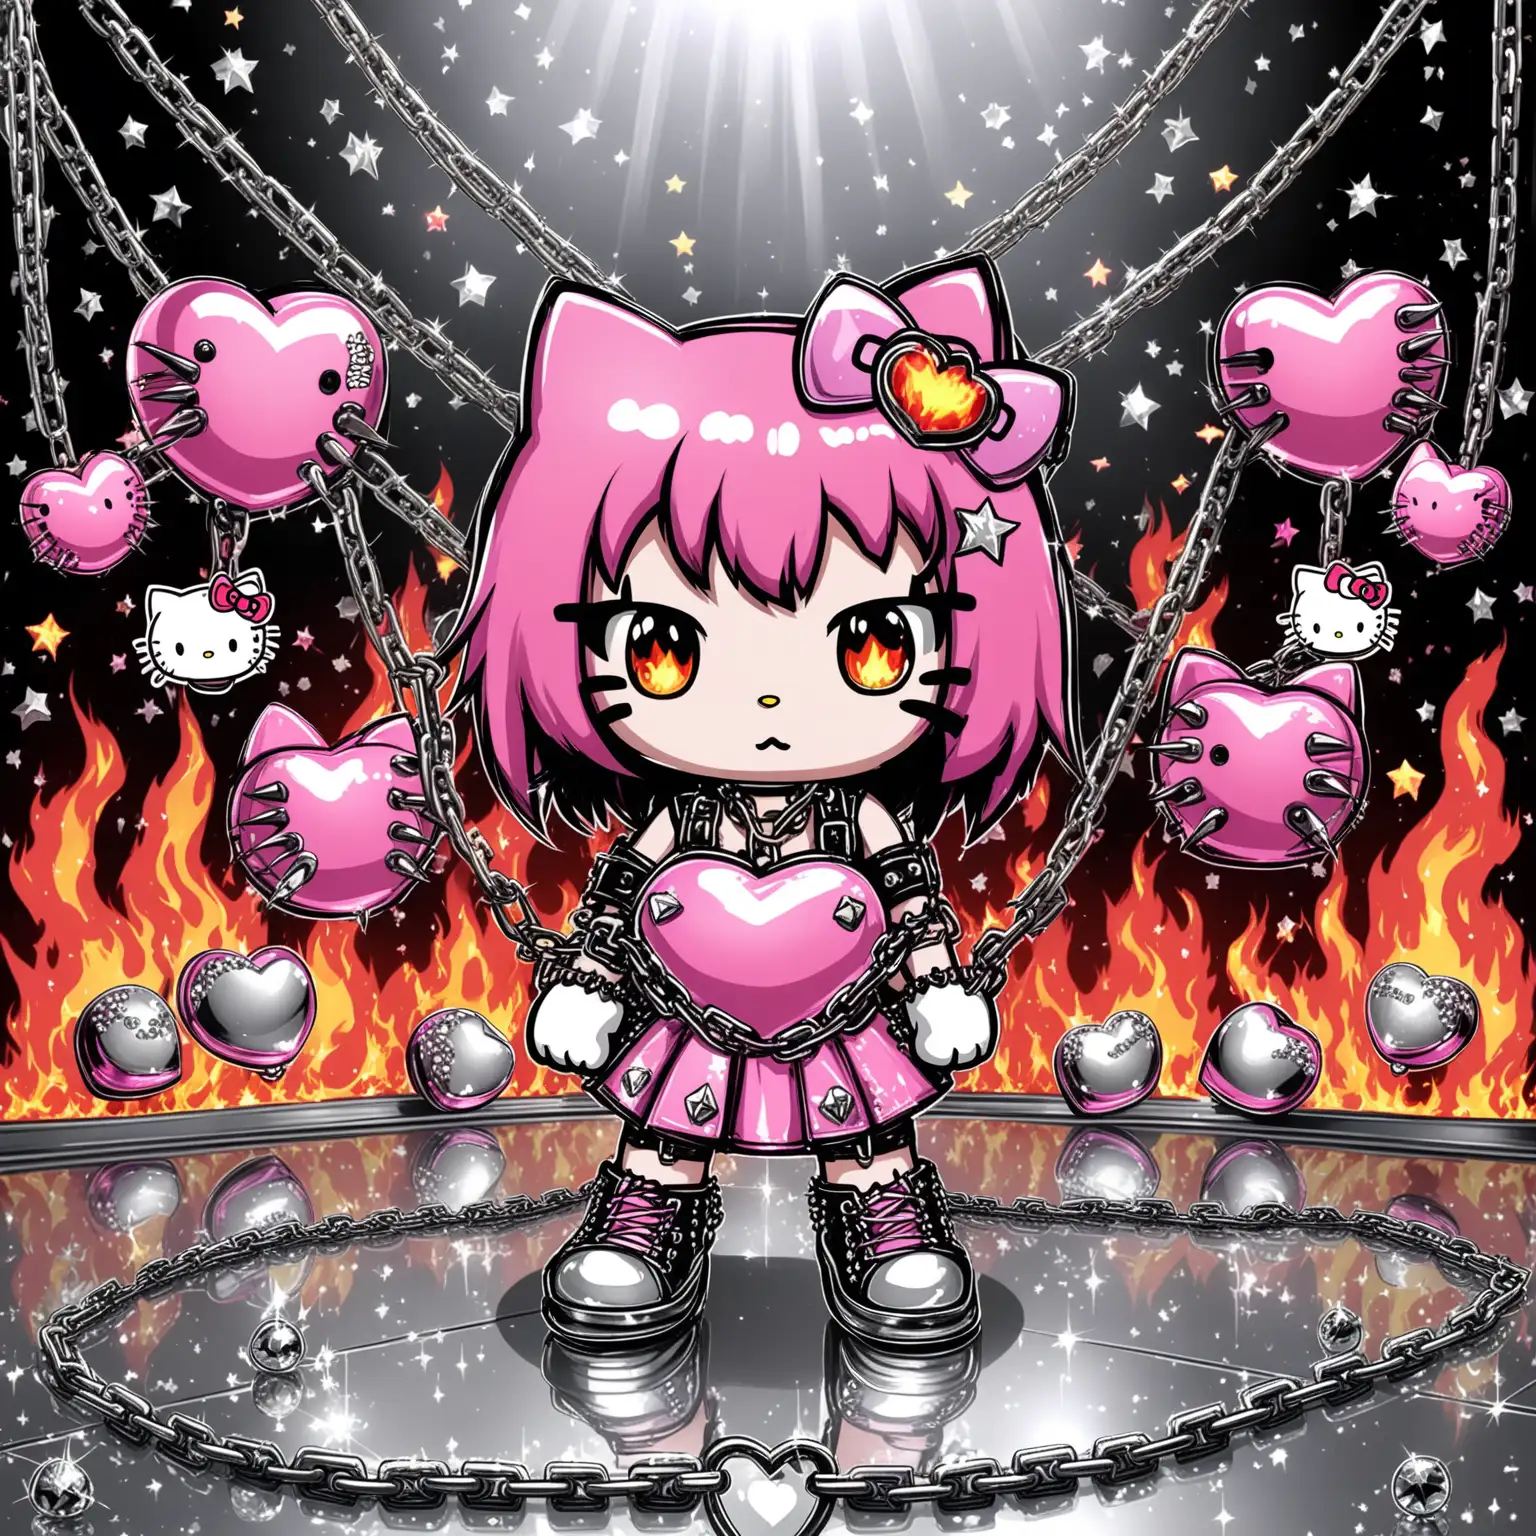 Punk Rock Hello Kitty with Chains Spikes and HeartShaped Bombs